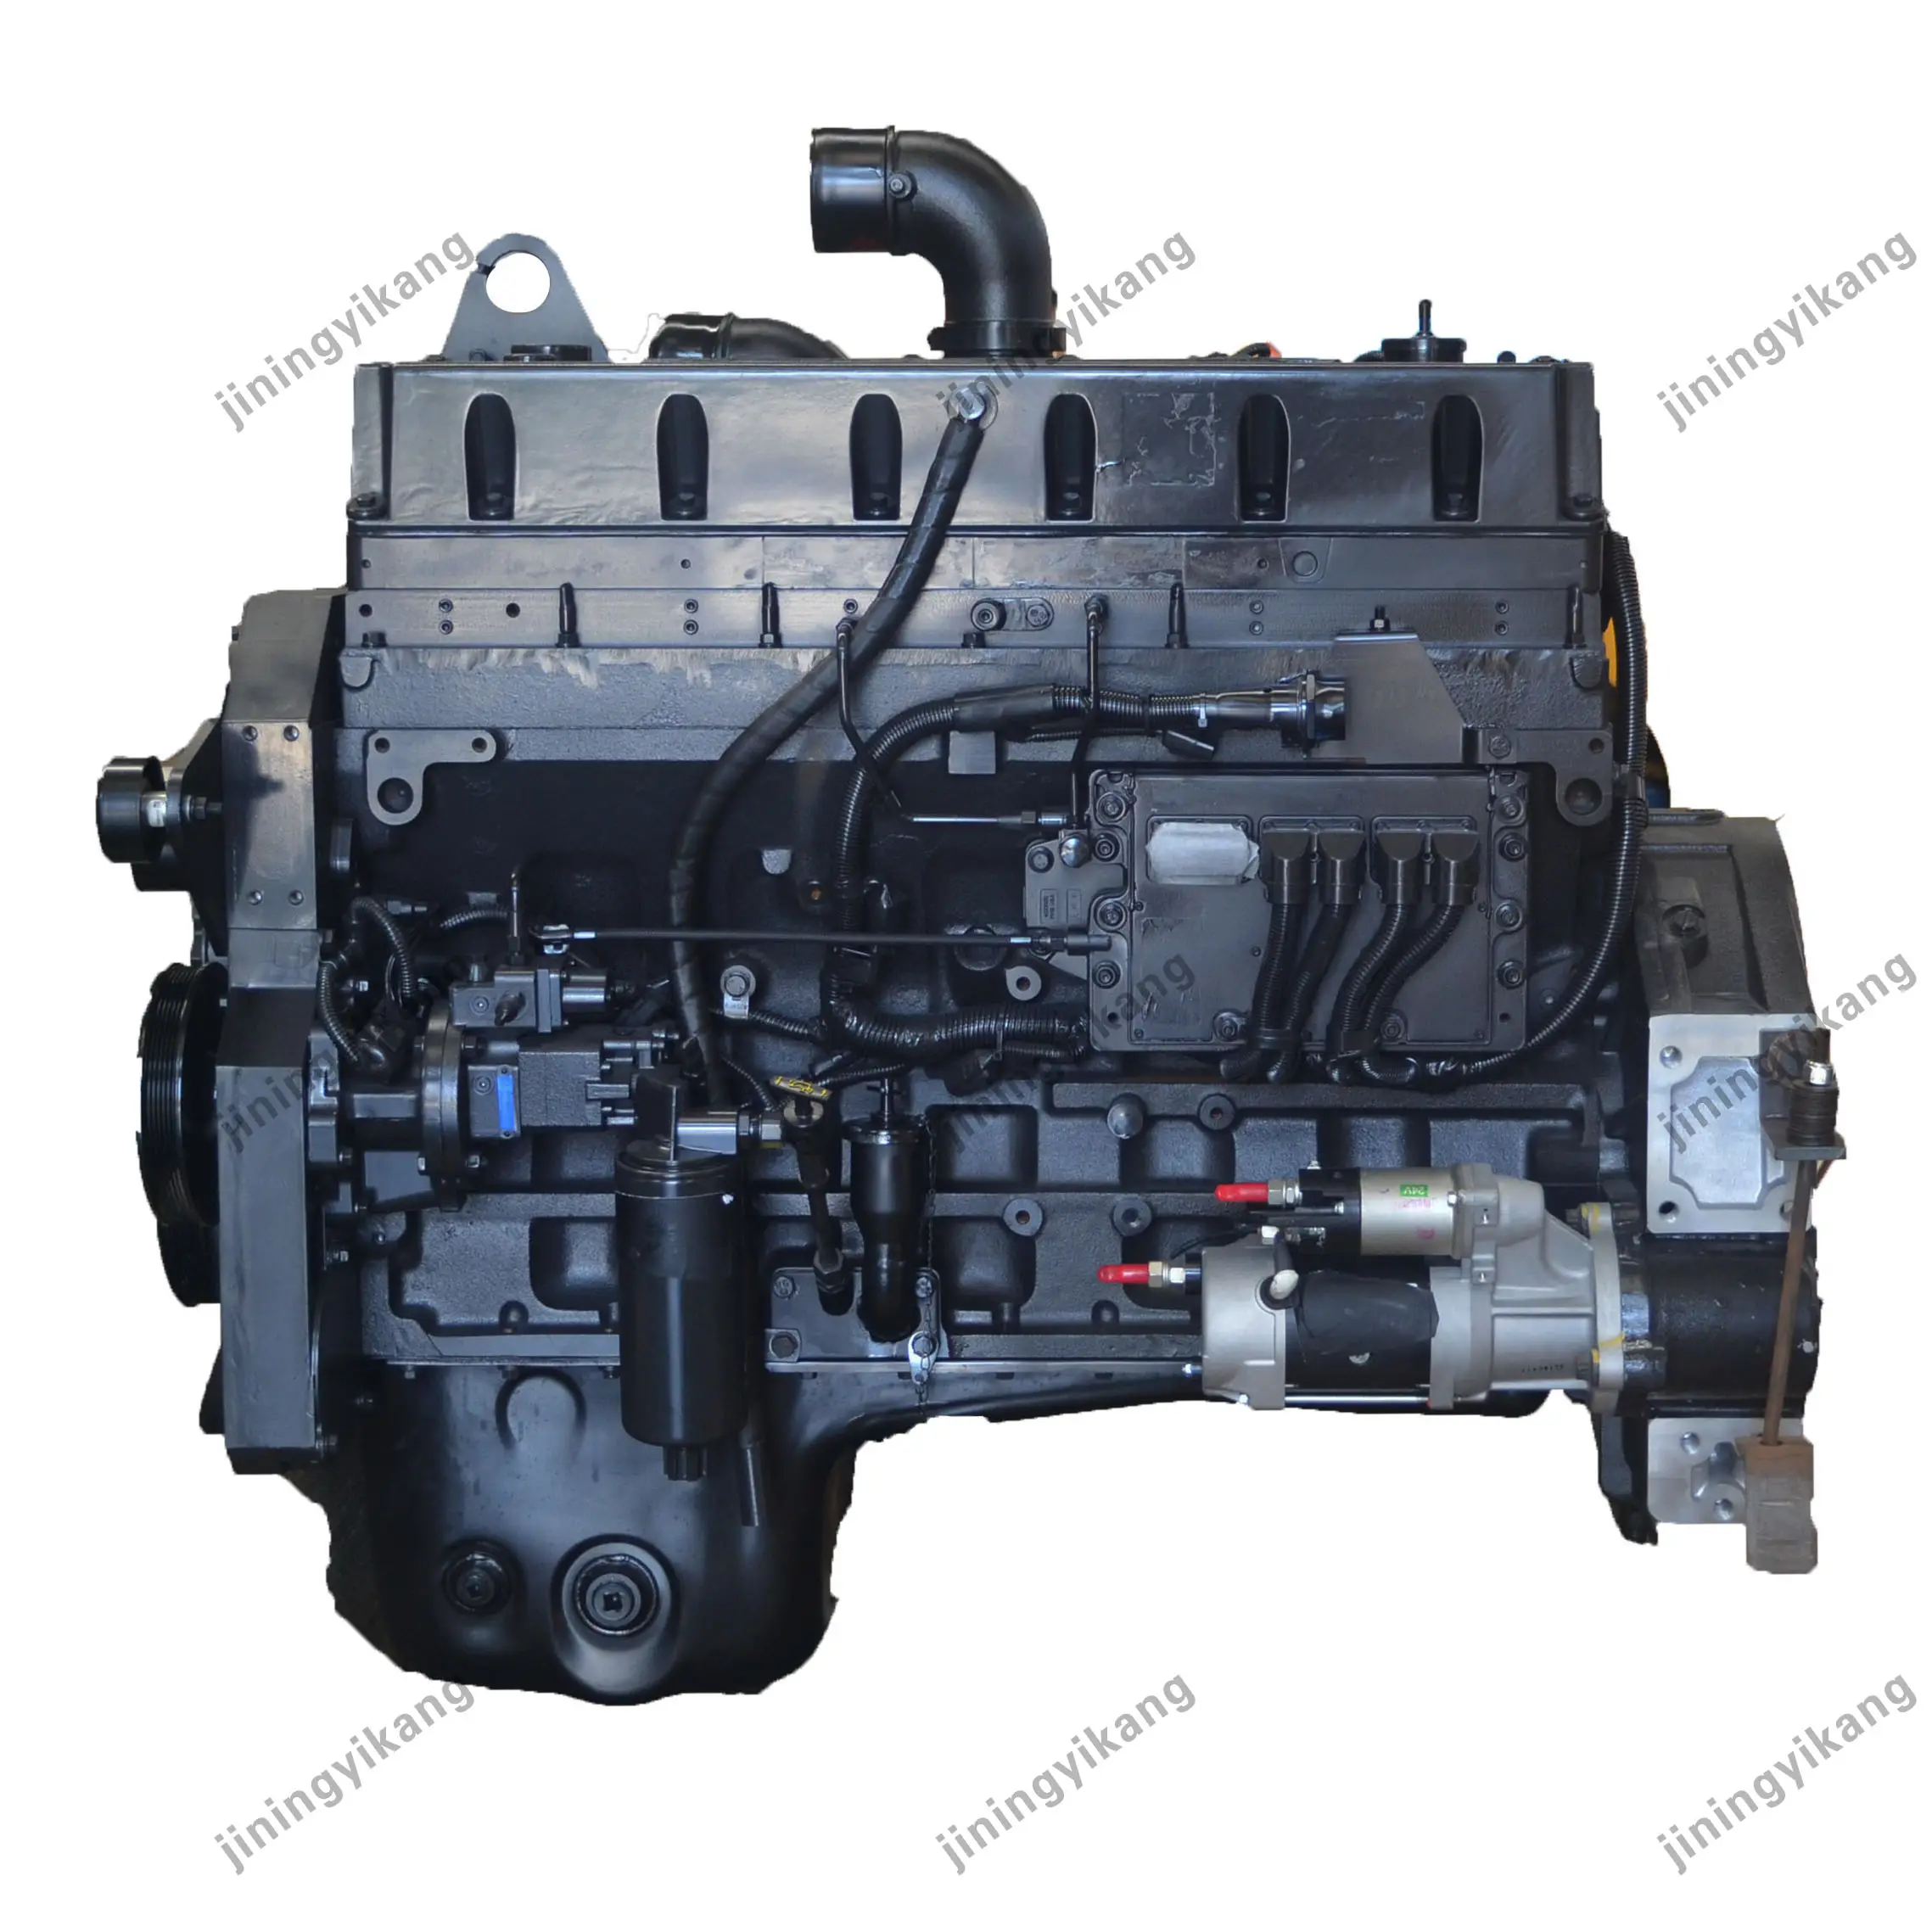 Six Cylinder Air Cooled ISM11E4 308 Diesel Engine Assembly ISM11 M11 Machinery Engines For Excavator Engine